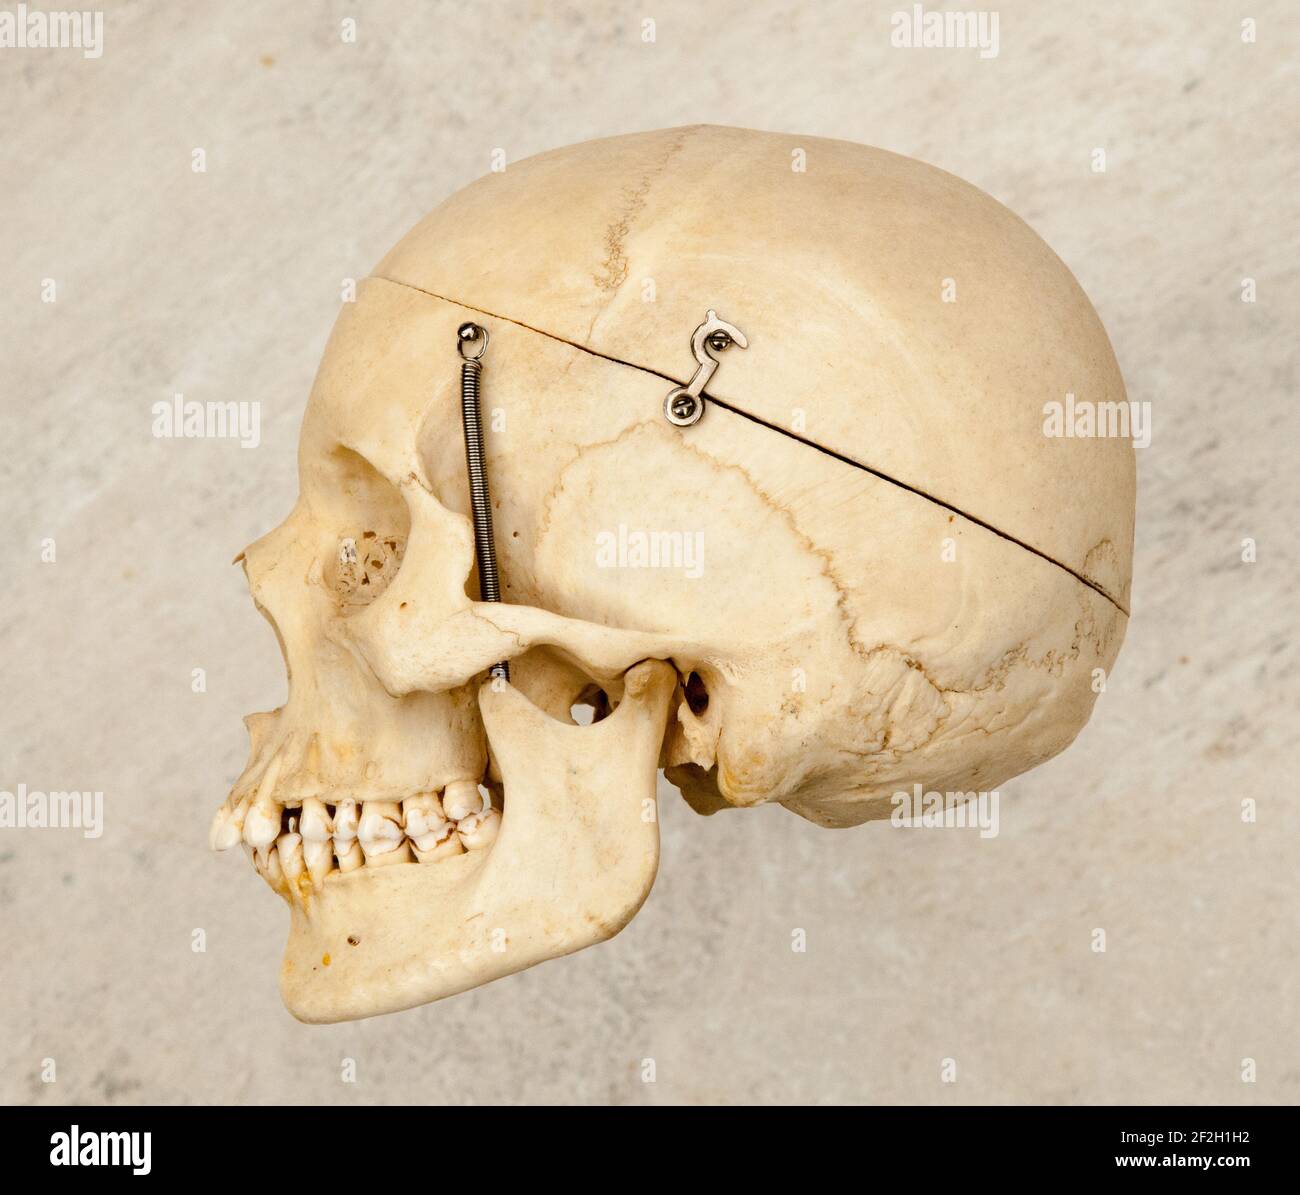 Sideways or profile view of a human skull which has been prepared for medical studies. Stock Photo